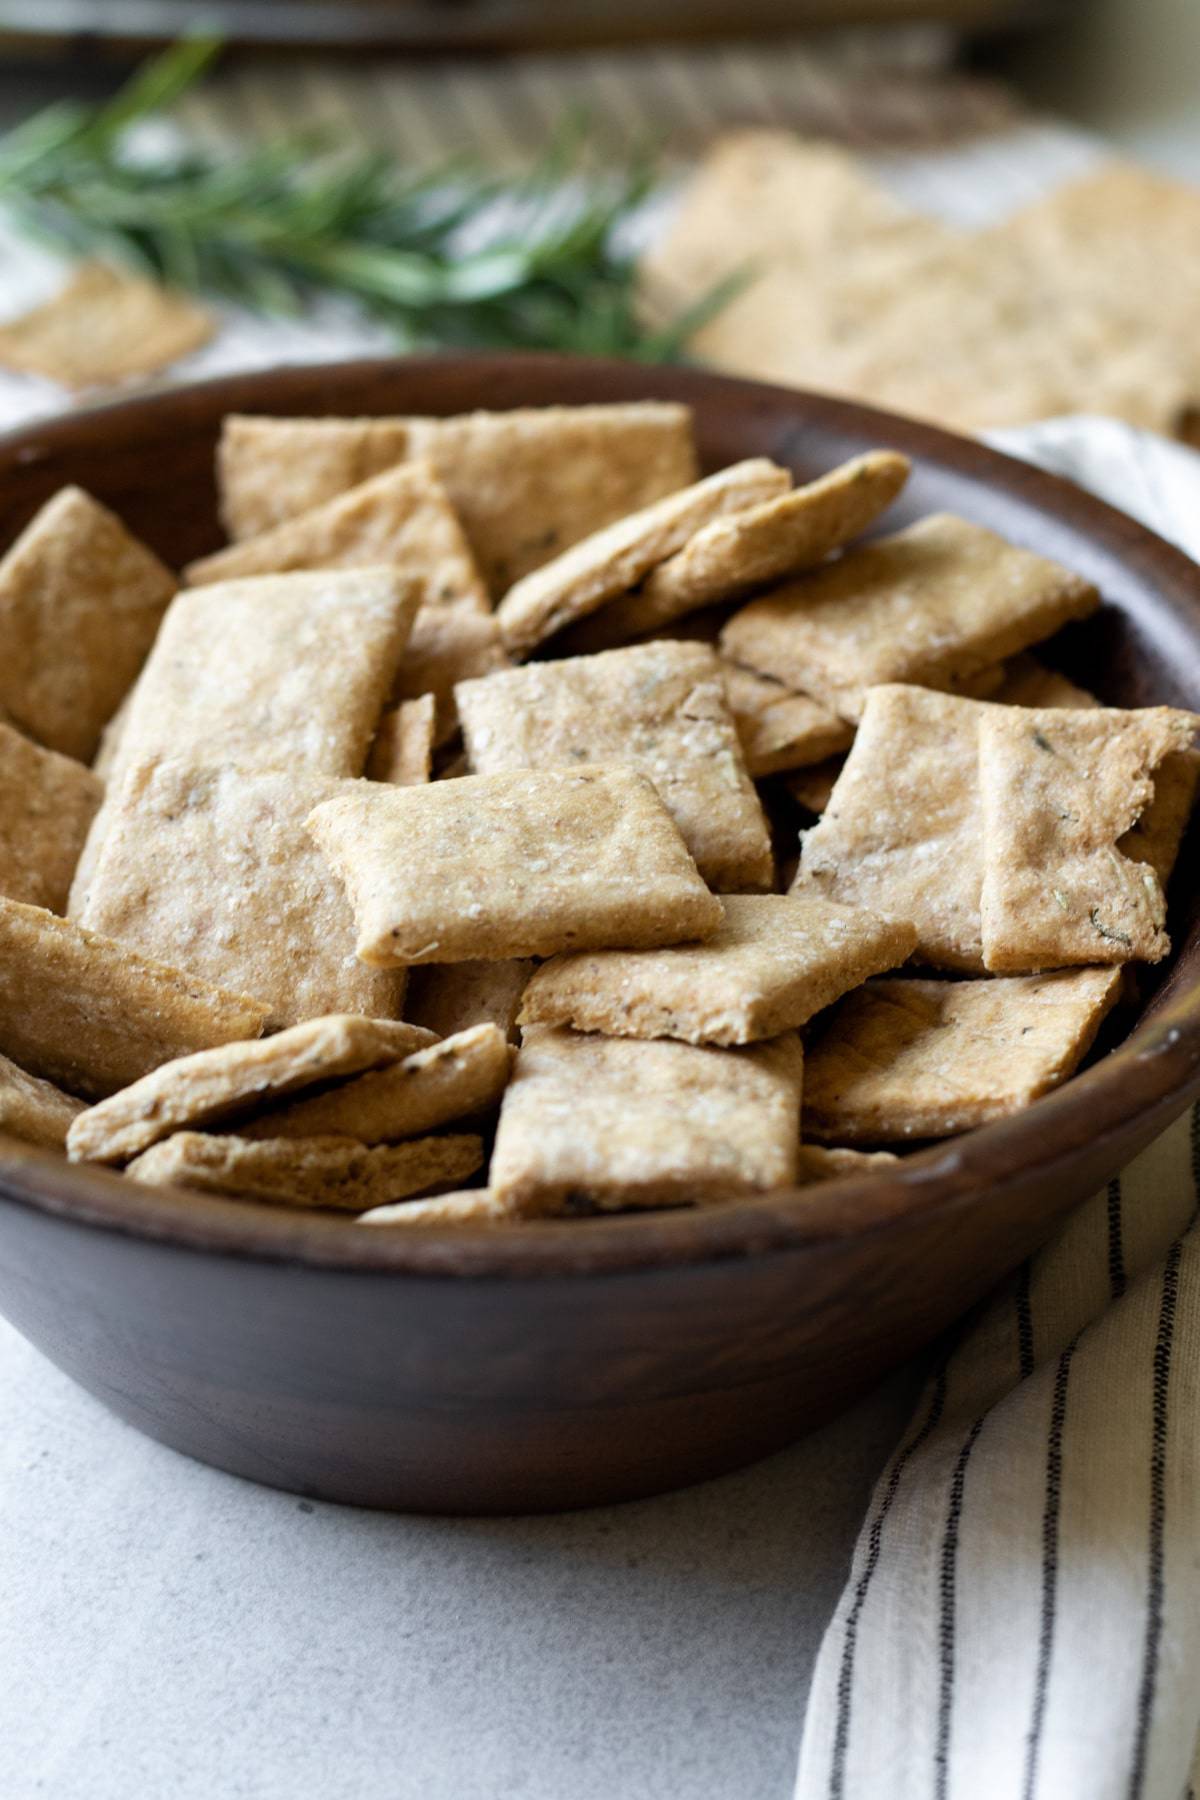 rectangular wheat crackers in a wooden bowl.